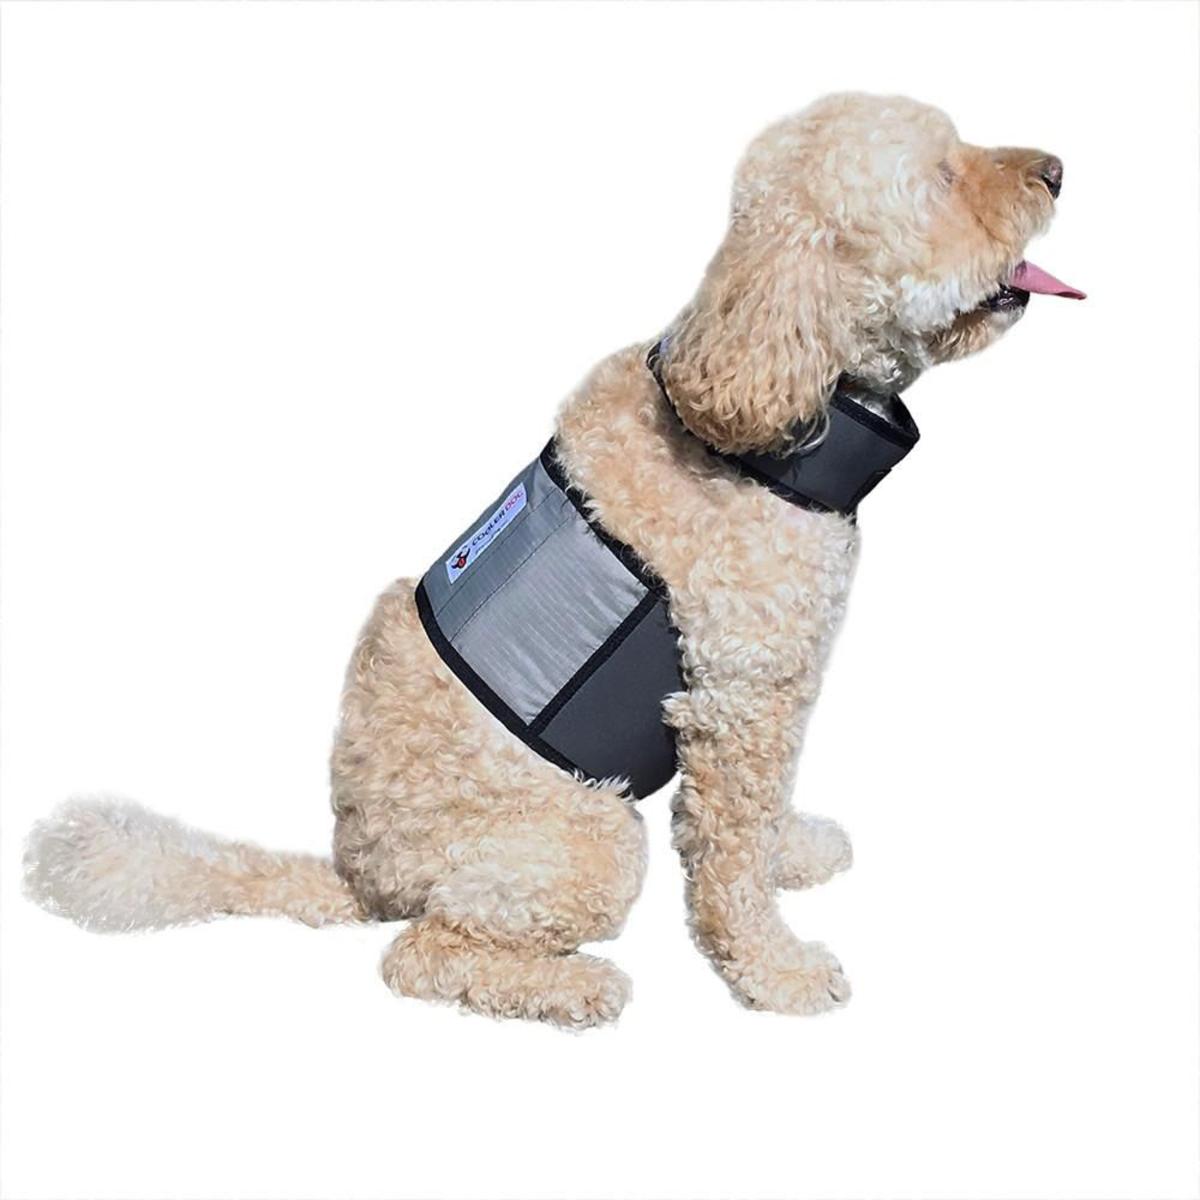 Cooler Dog Cooling Vest and Collar - Small 788451777039 | eBay